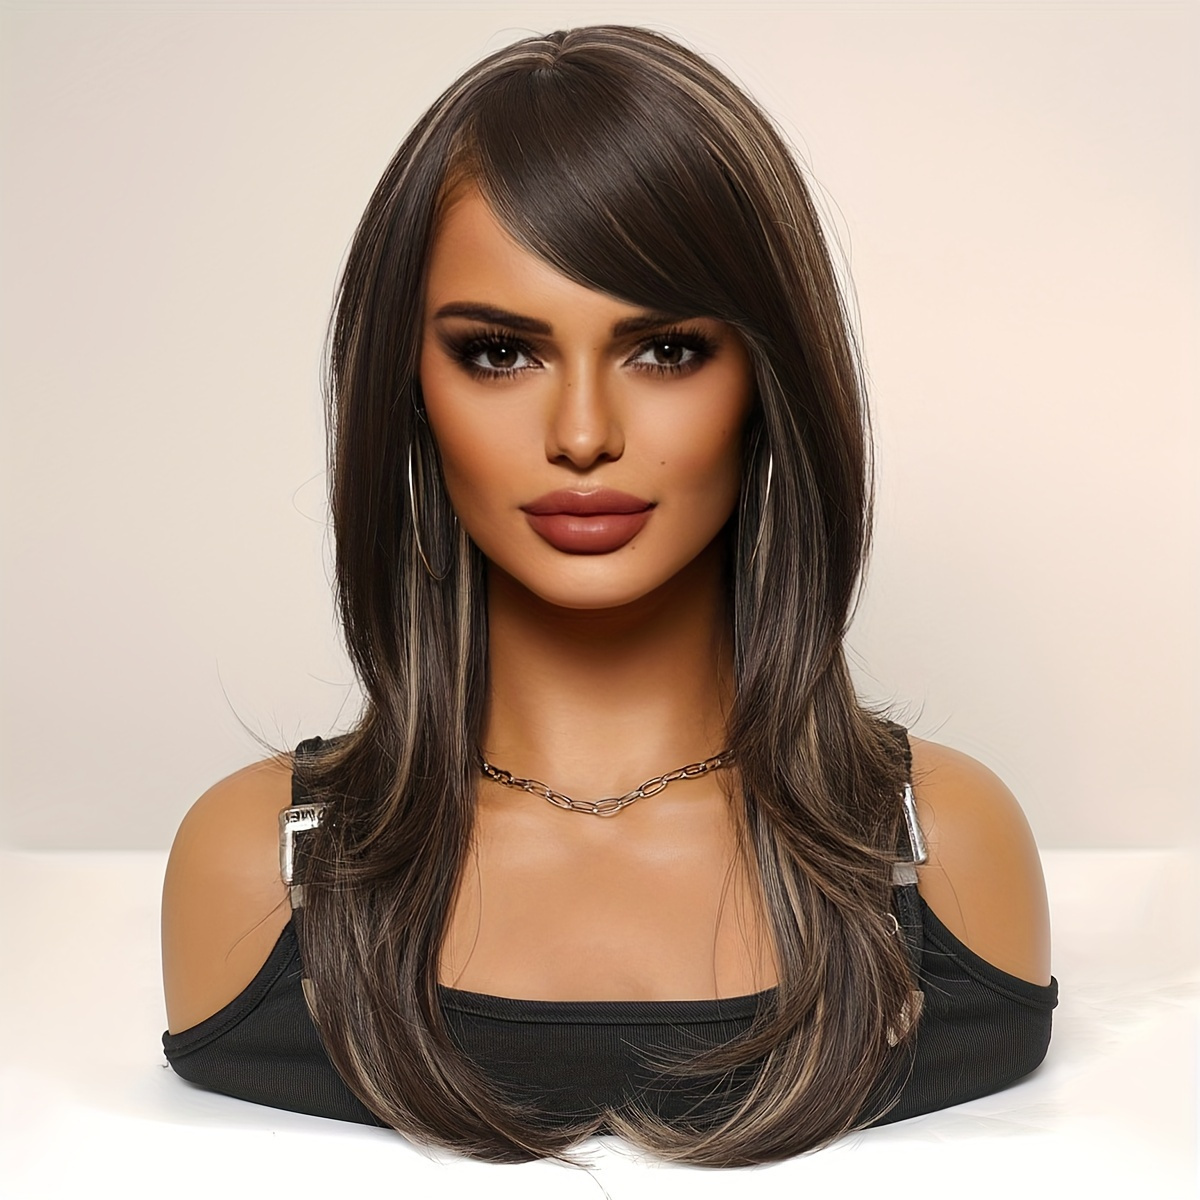 

Long Brown Wig With Golden Highlights For Women, Long Loose Wavy Layered Synthetic Hair Wig With Bangs For Daily Party 22inches